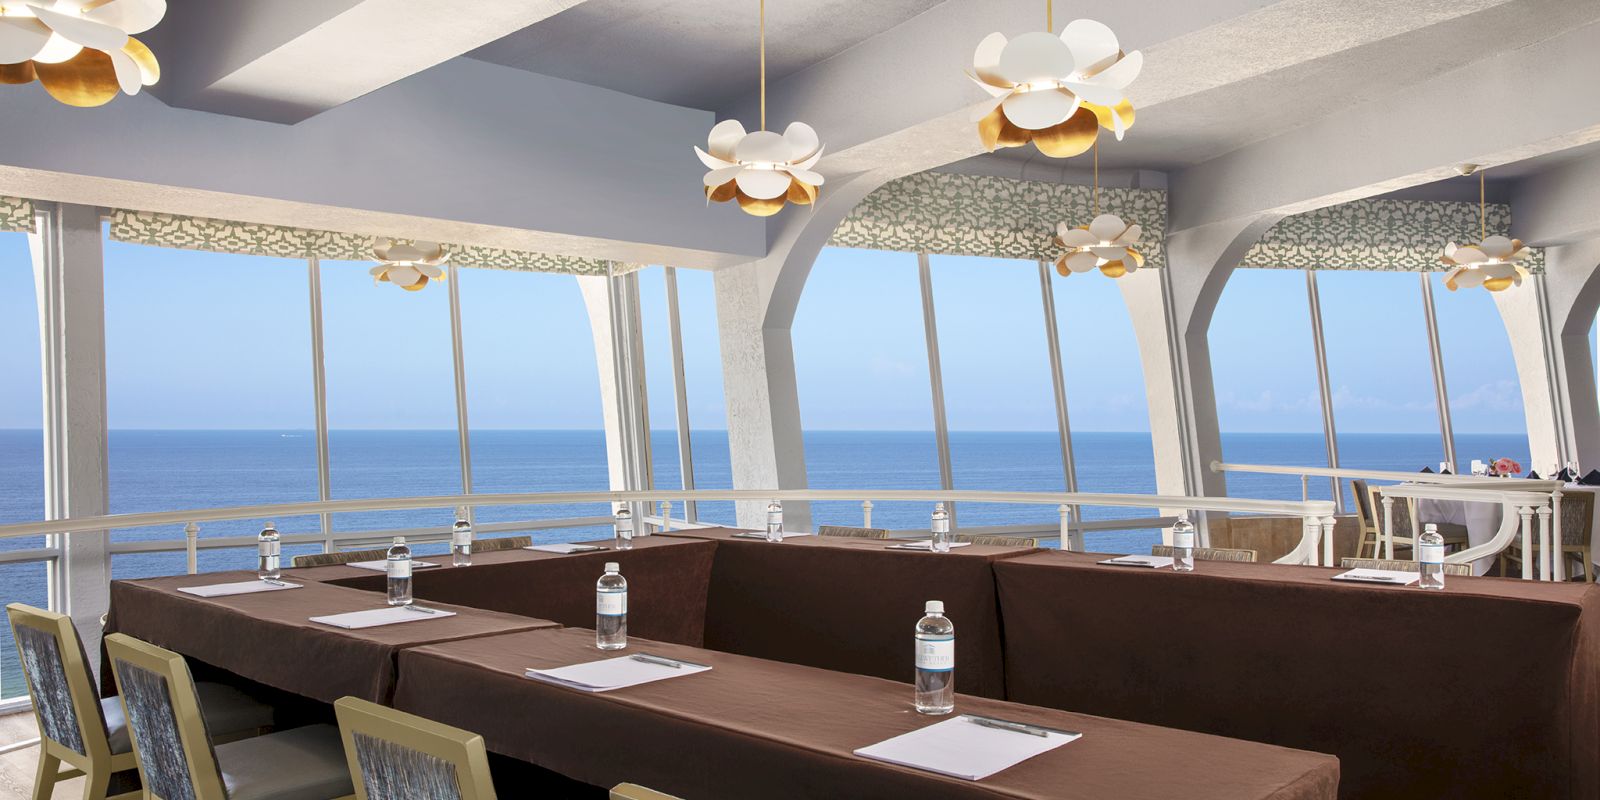 Elegant dining area by the sea with stylish lighting and modern decor.